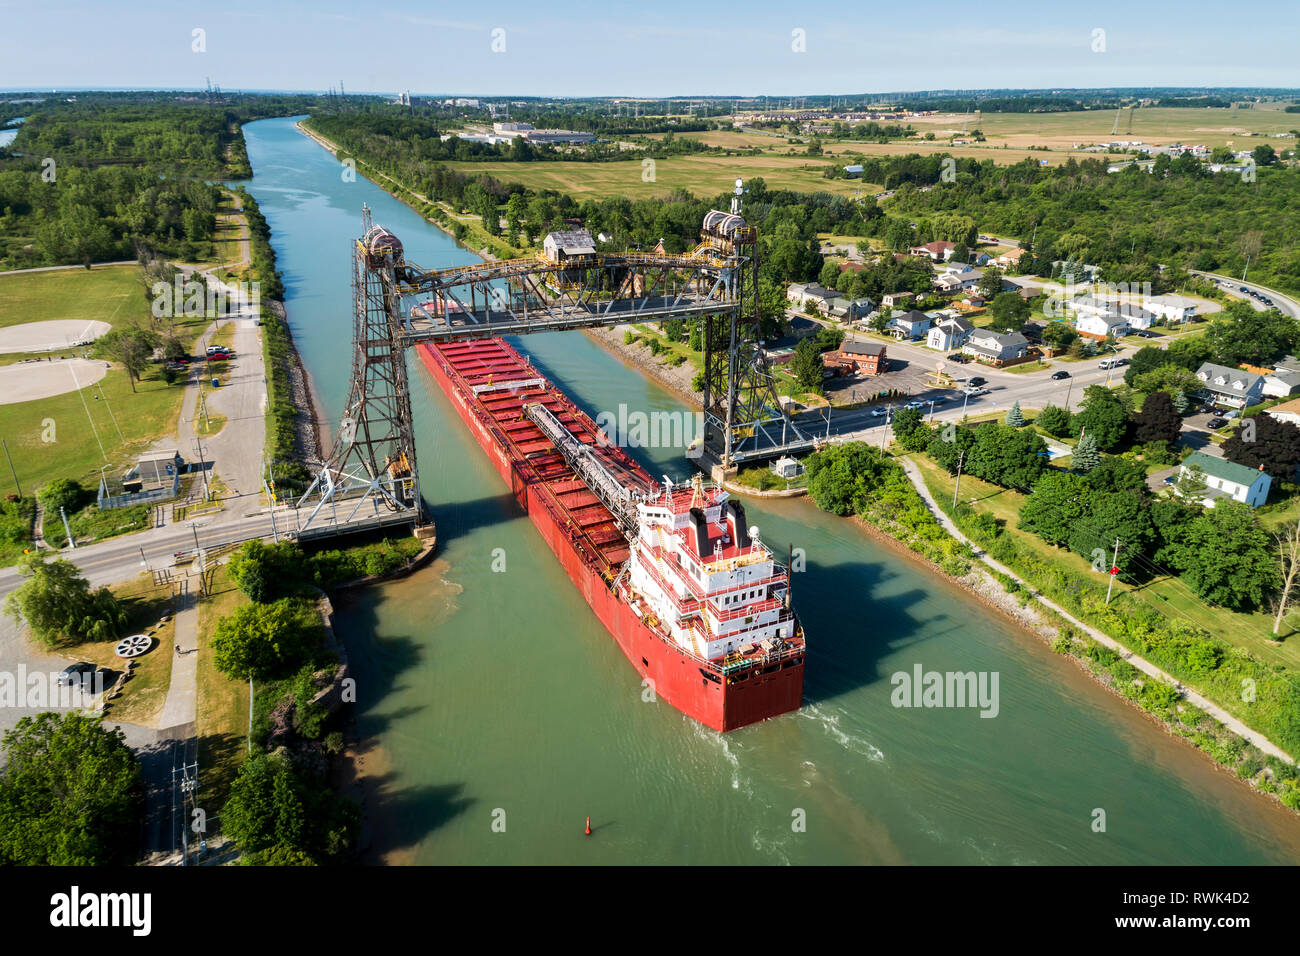 Aerial view of large laker ship navigating under a metal lift bridge in a canal with blue sky; Thorold, Ontario, Canada Stock Photo